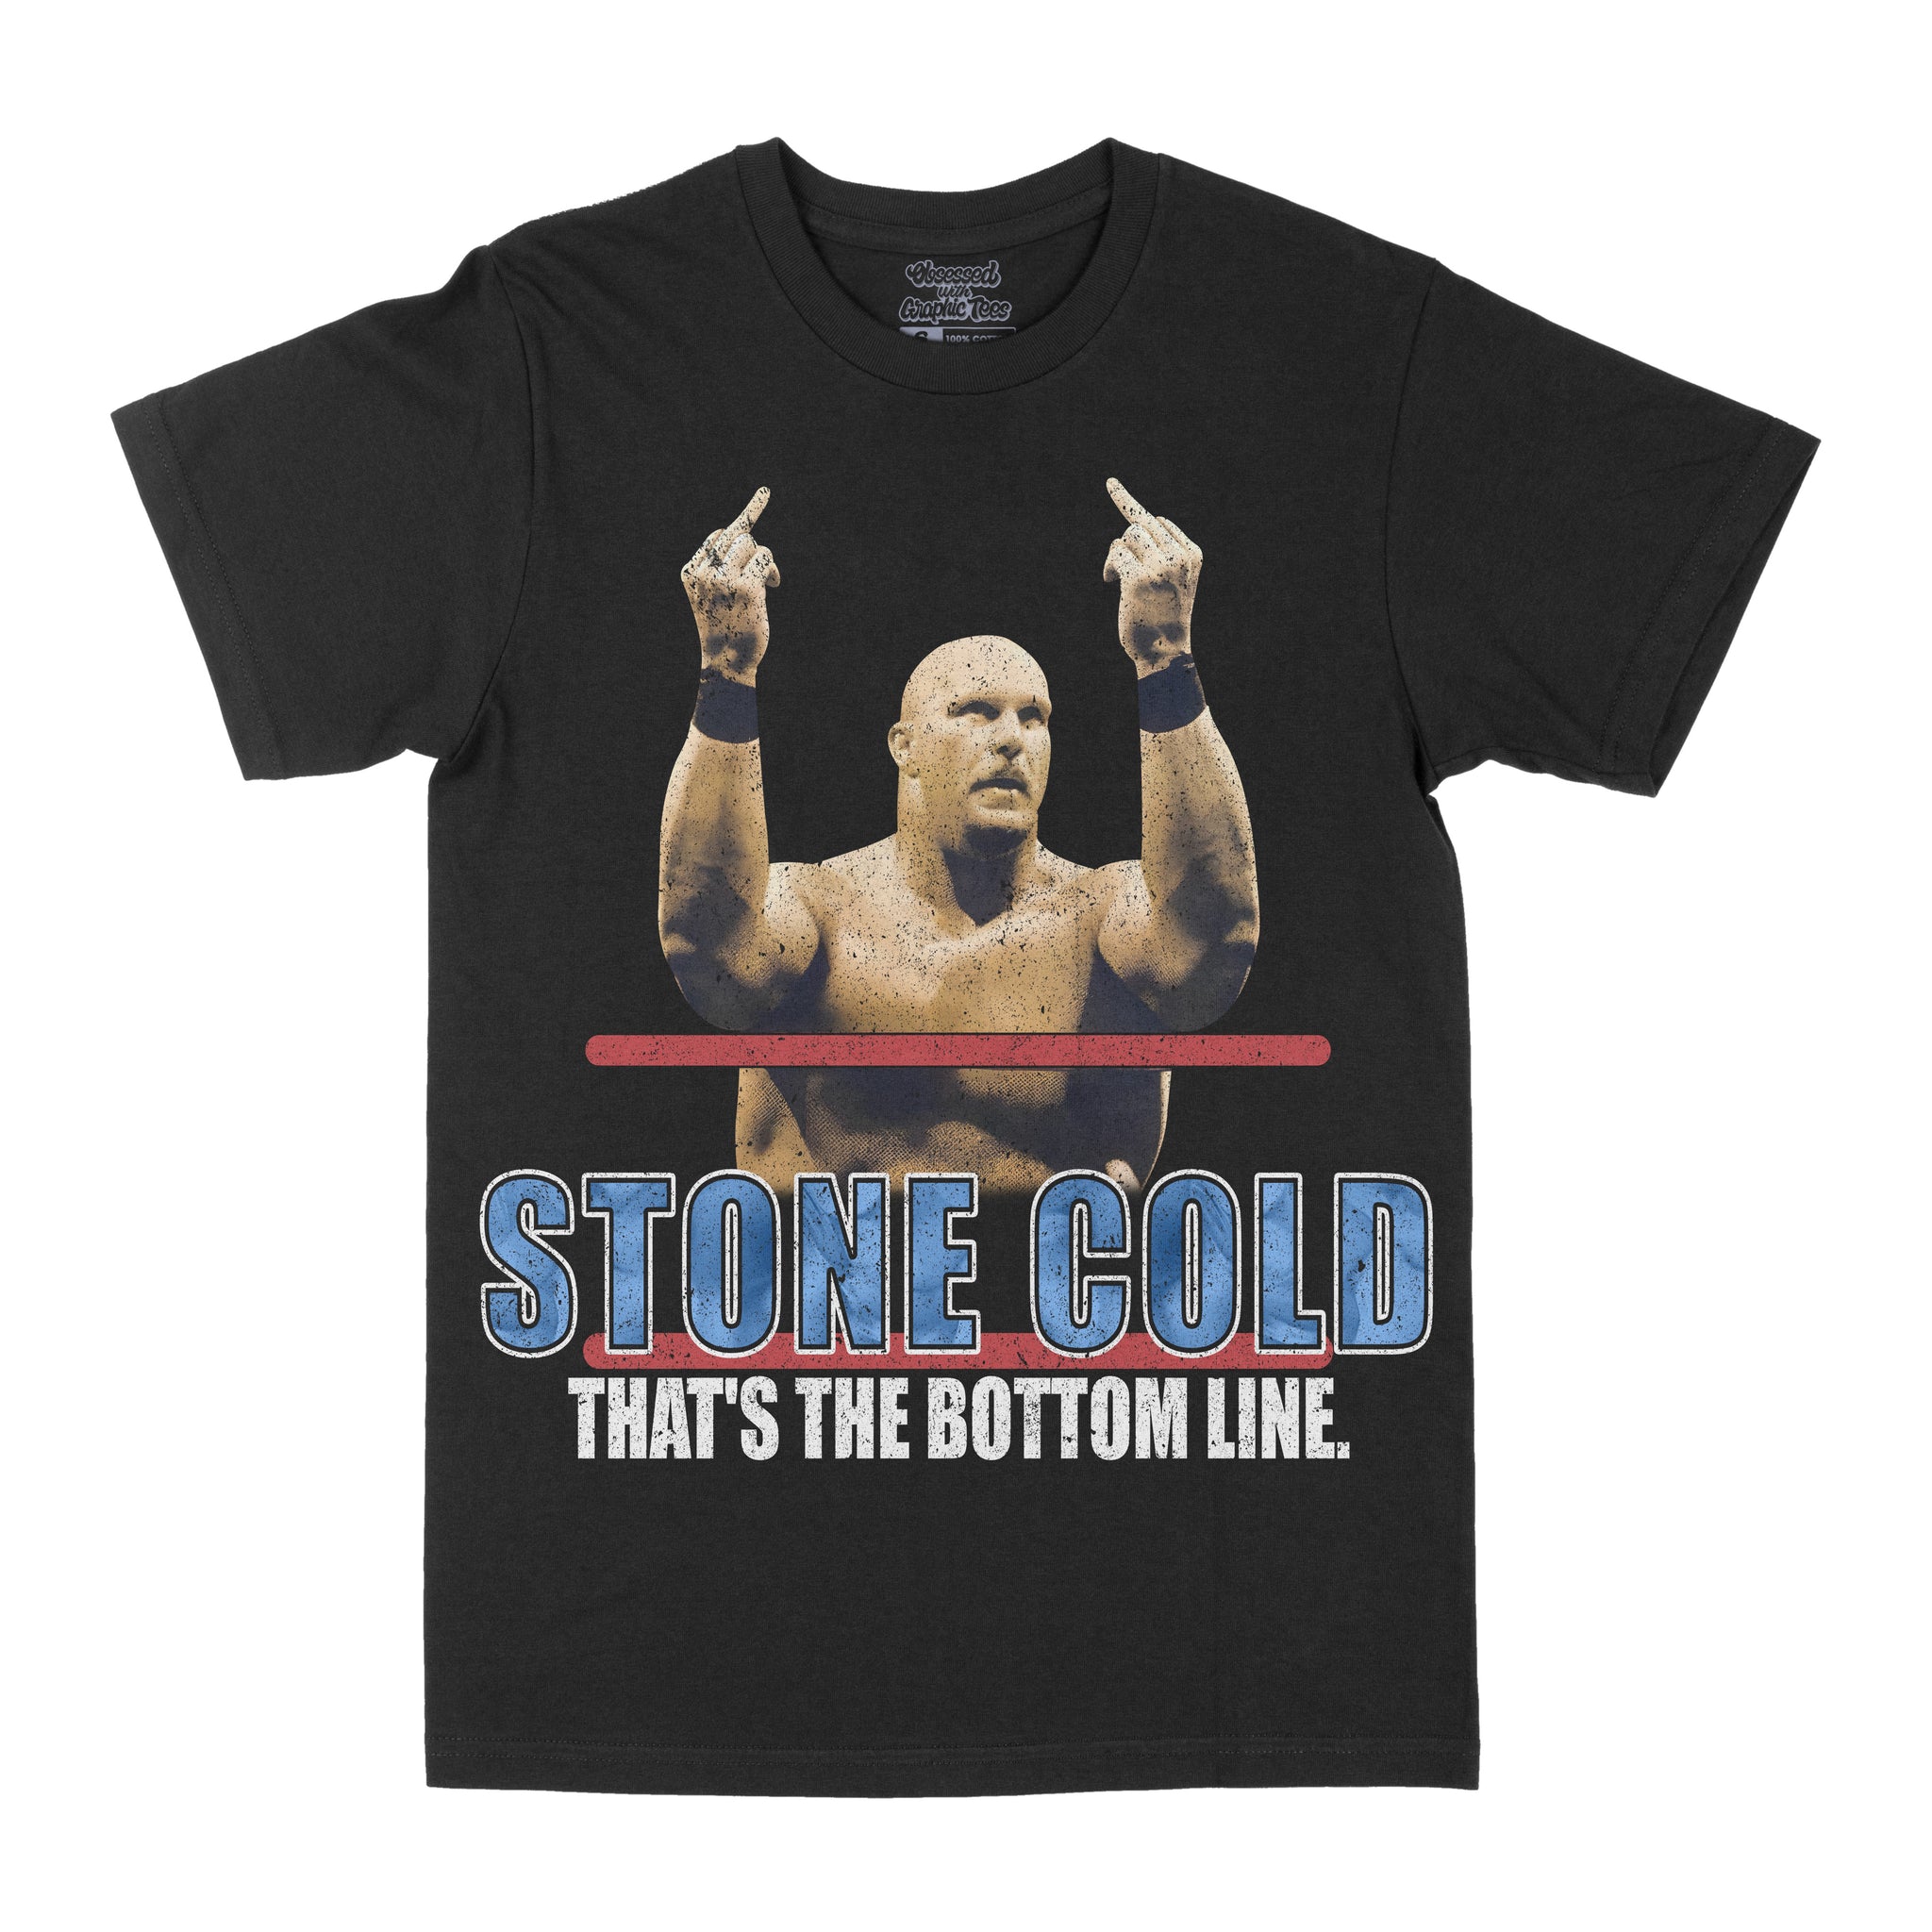 Stone Cold "Bottom Line" Graphic Tee